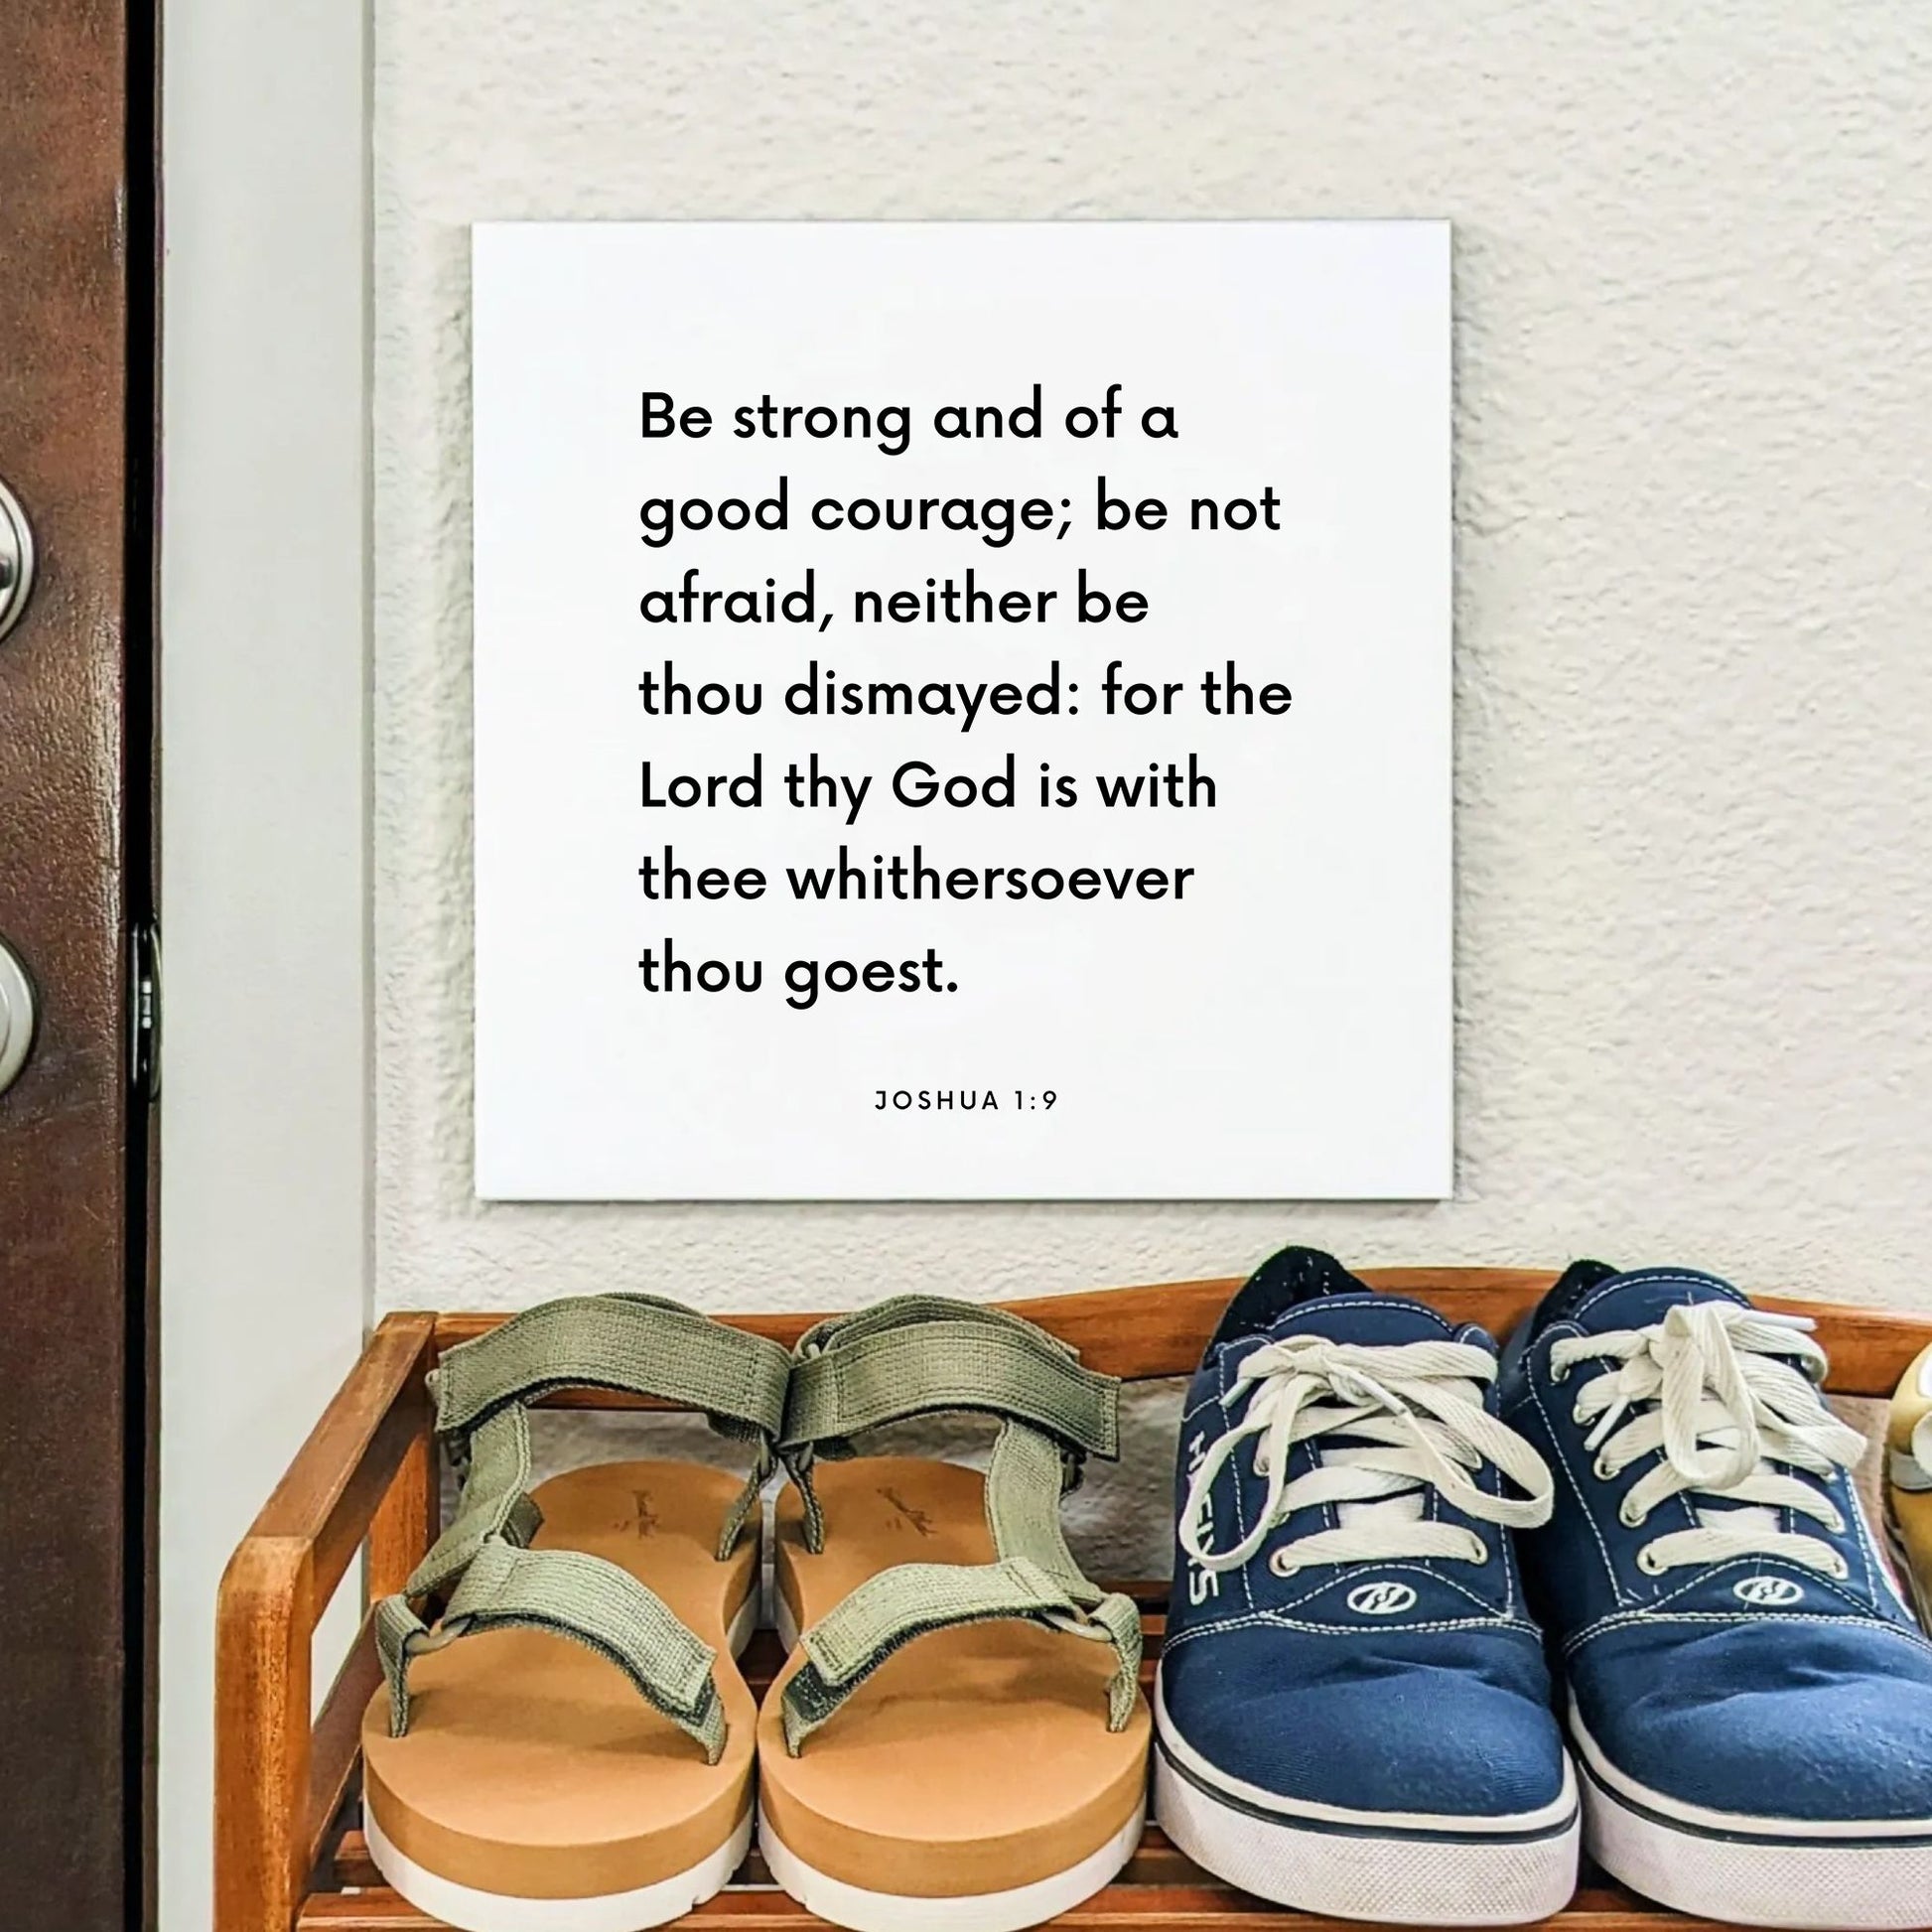 Shoes mouting of the scripture tile for Joshua 1:9 - "Be strong and of a good courage"